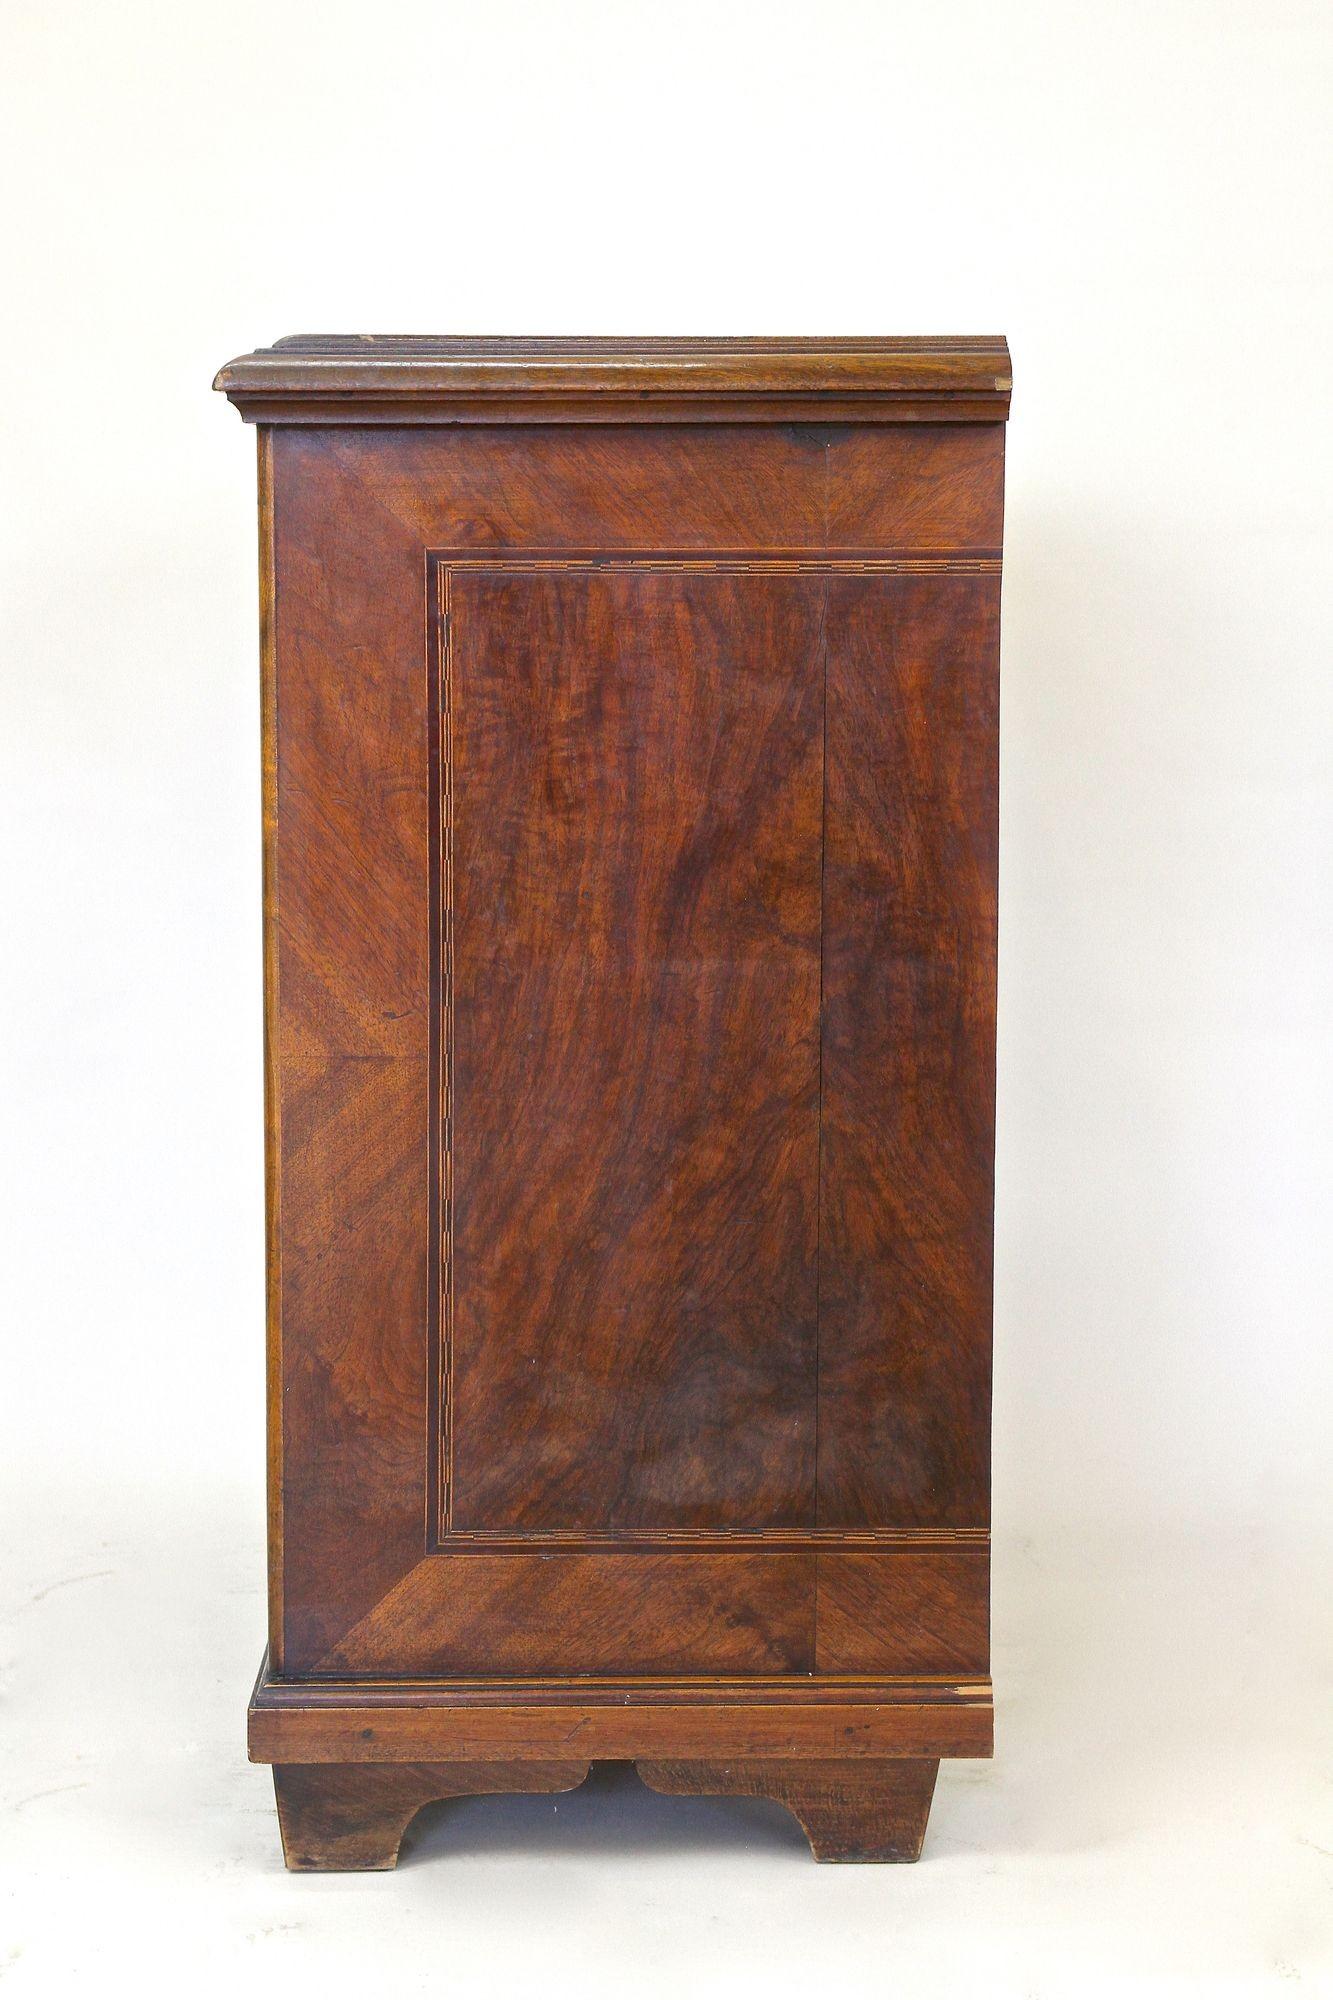 19th Century Biedermeier Nutwood Chest Of Drawers With Micro-Inlays, AT ca. 1850 For Sale 10